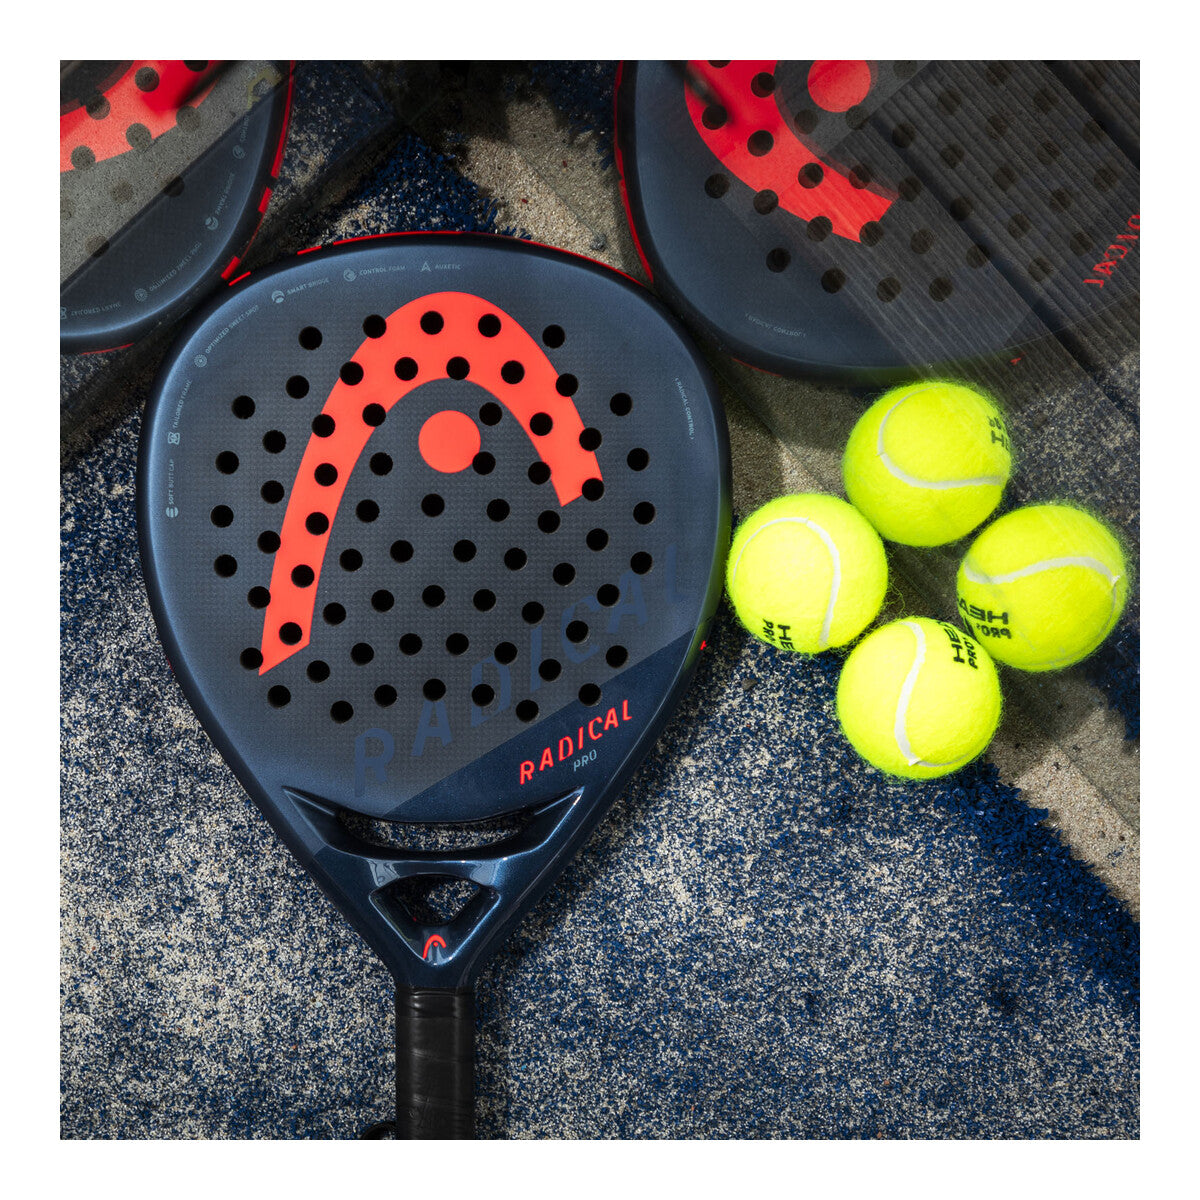 Head Radical Pro Padel Racquet which is available for sale at GSM Sports